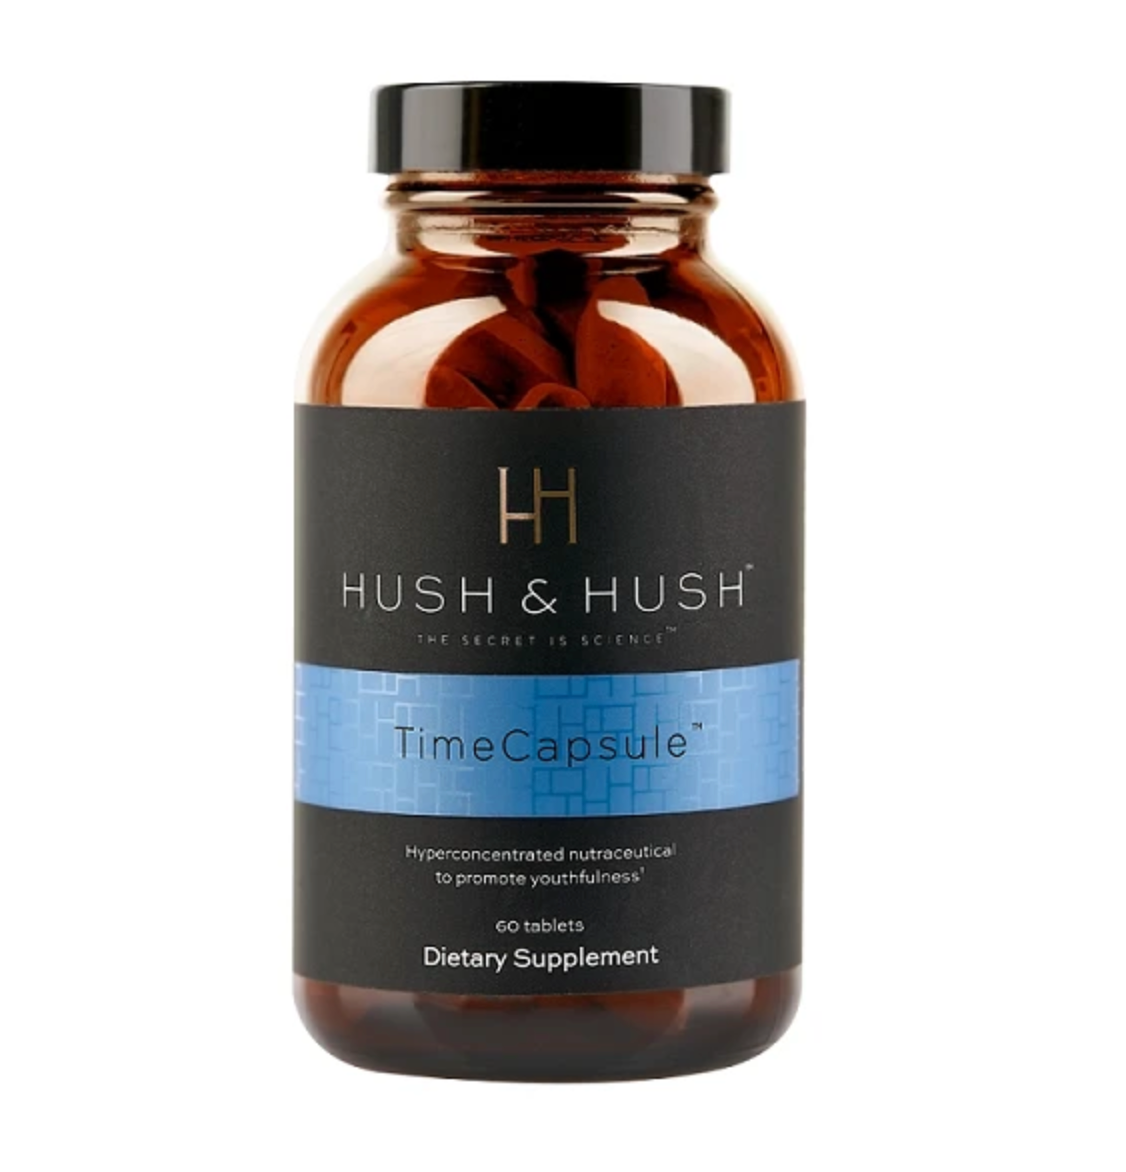 HUSH AND HUSH TIME CAPSULE-ANTI AGING SKIN SUPPLEMENTS - Go See Christy Beauty 